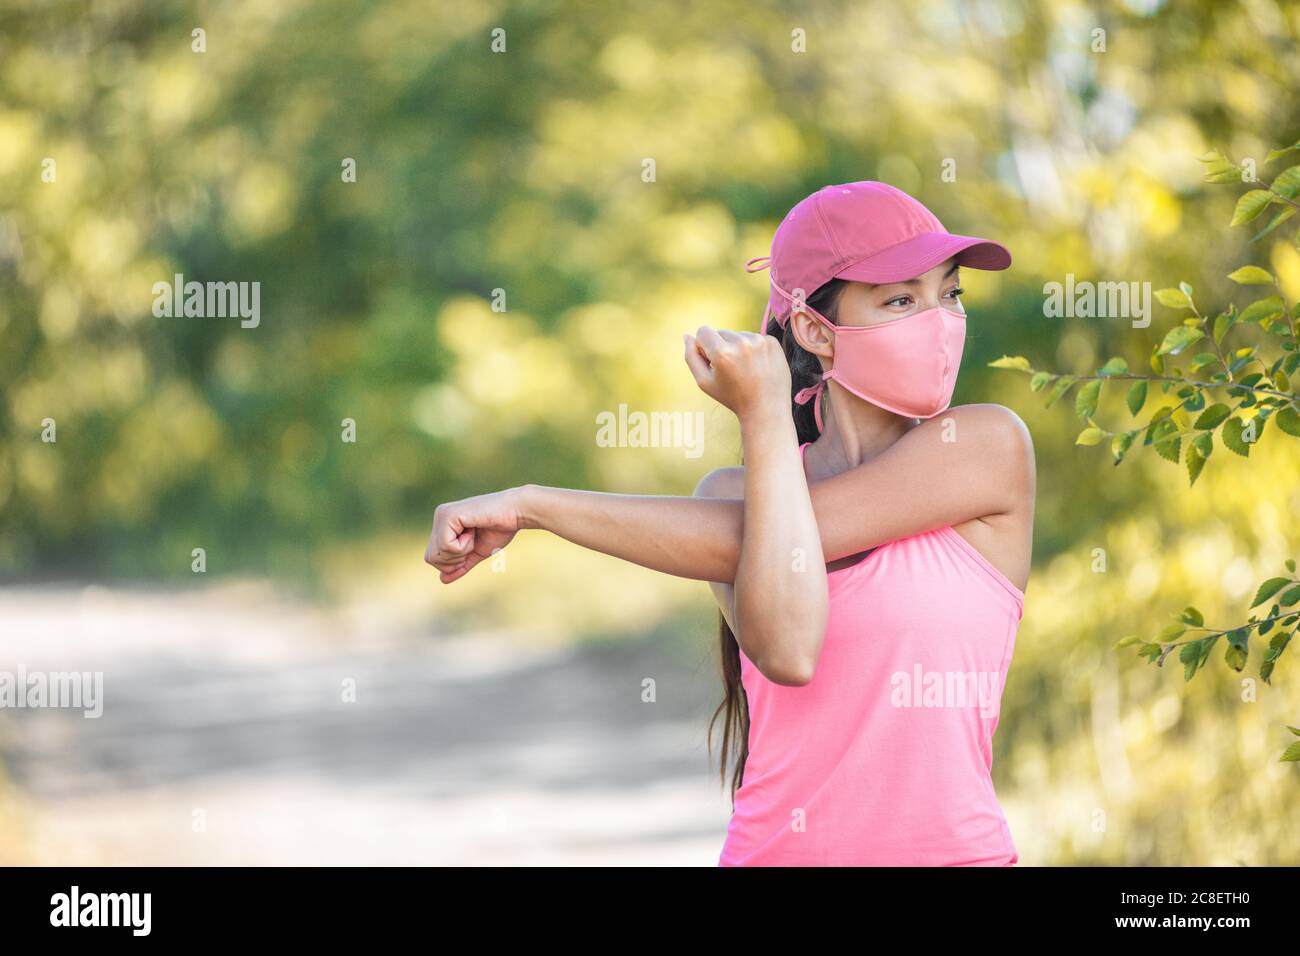 Mask covid-19 runner woman stretching arms before cardio workout on outdoor summer park run jogging wearing face covering protection for coronavirus Stock Photo